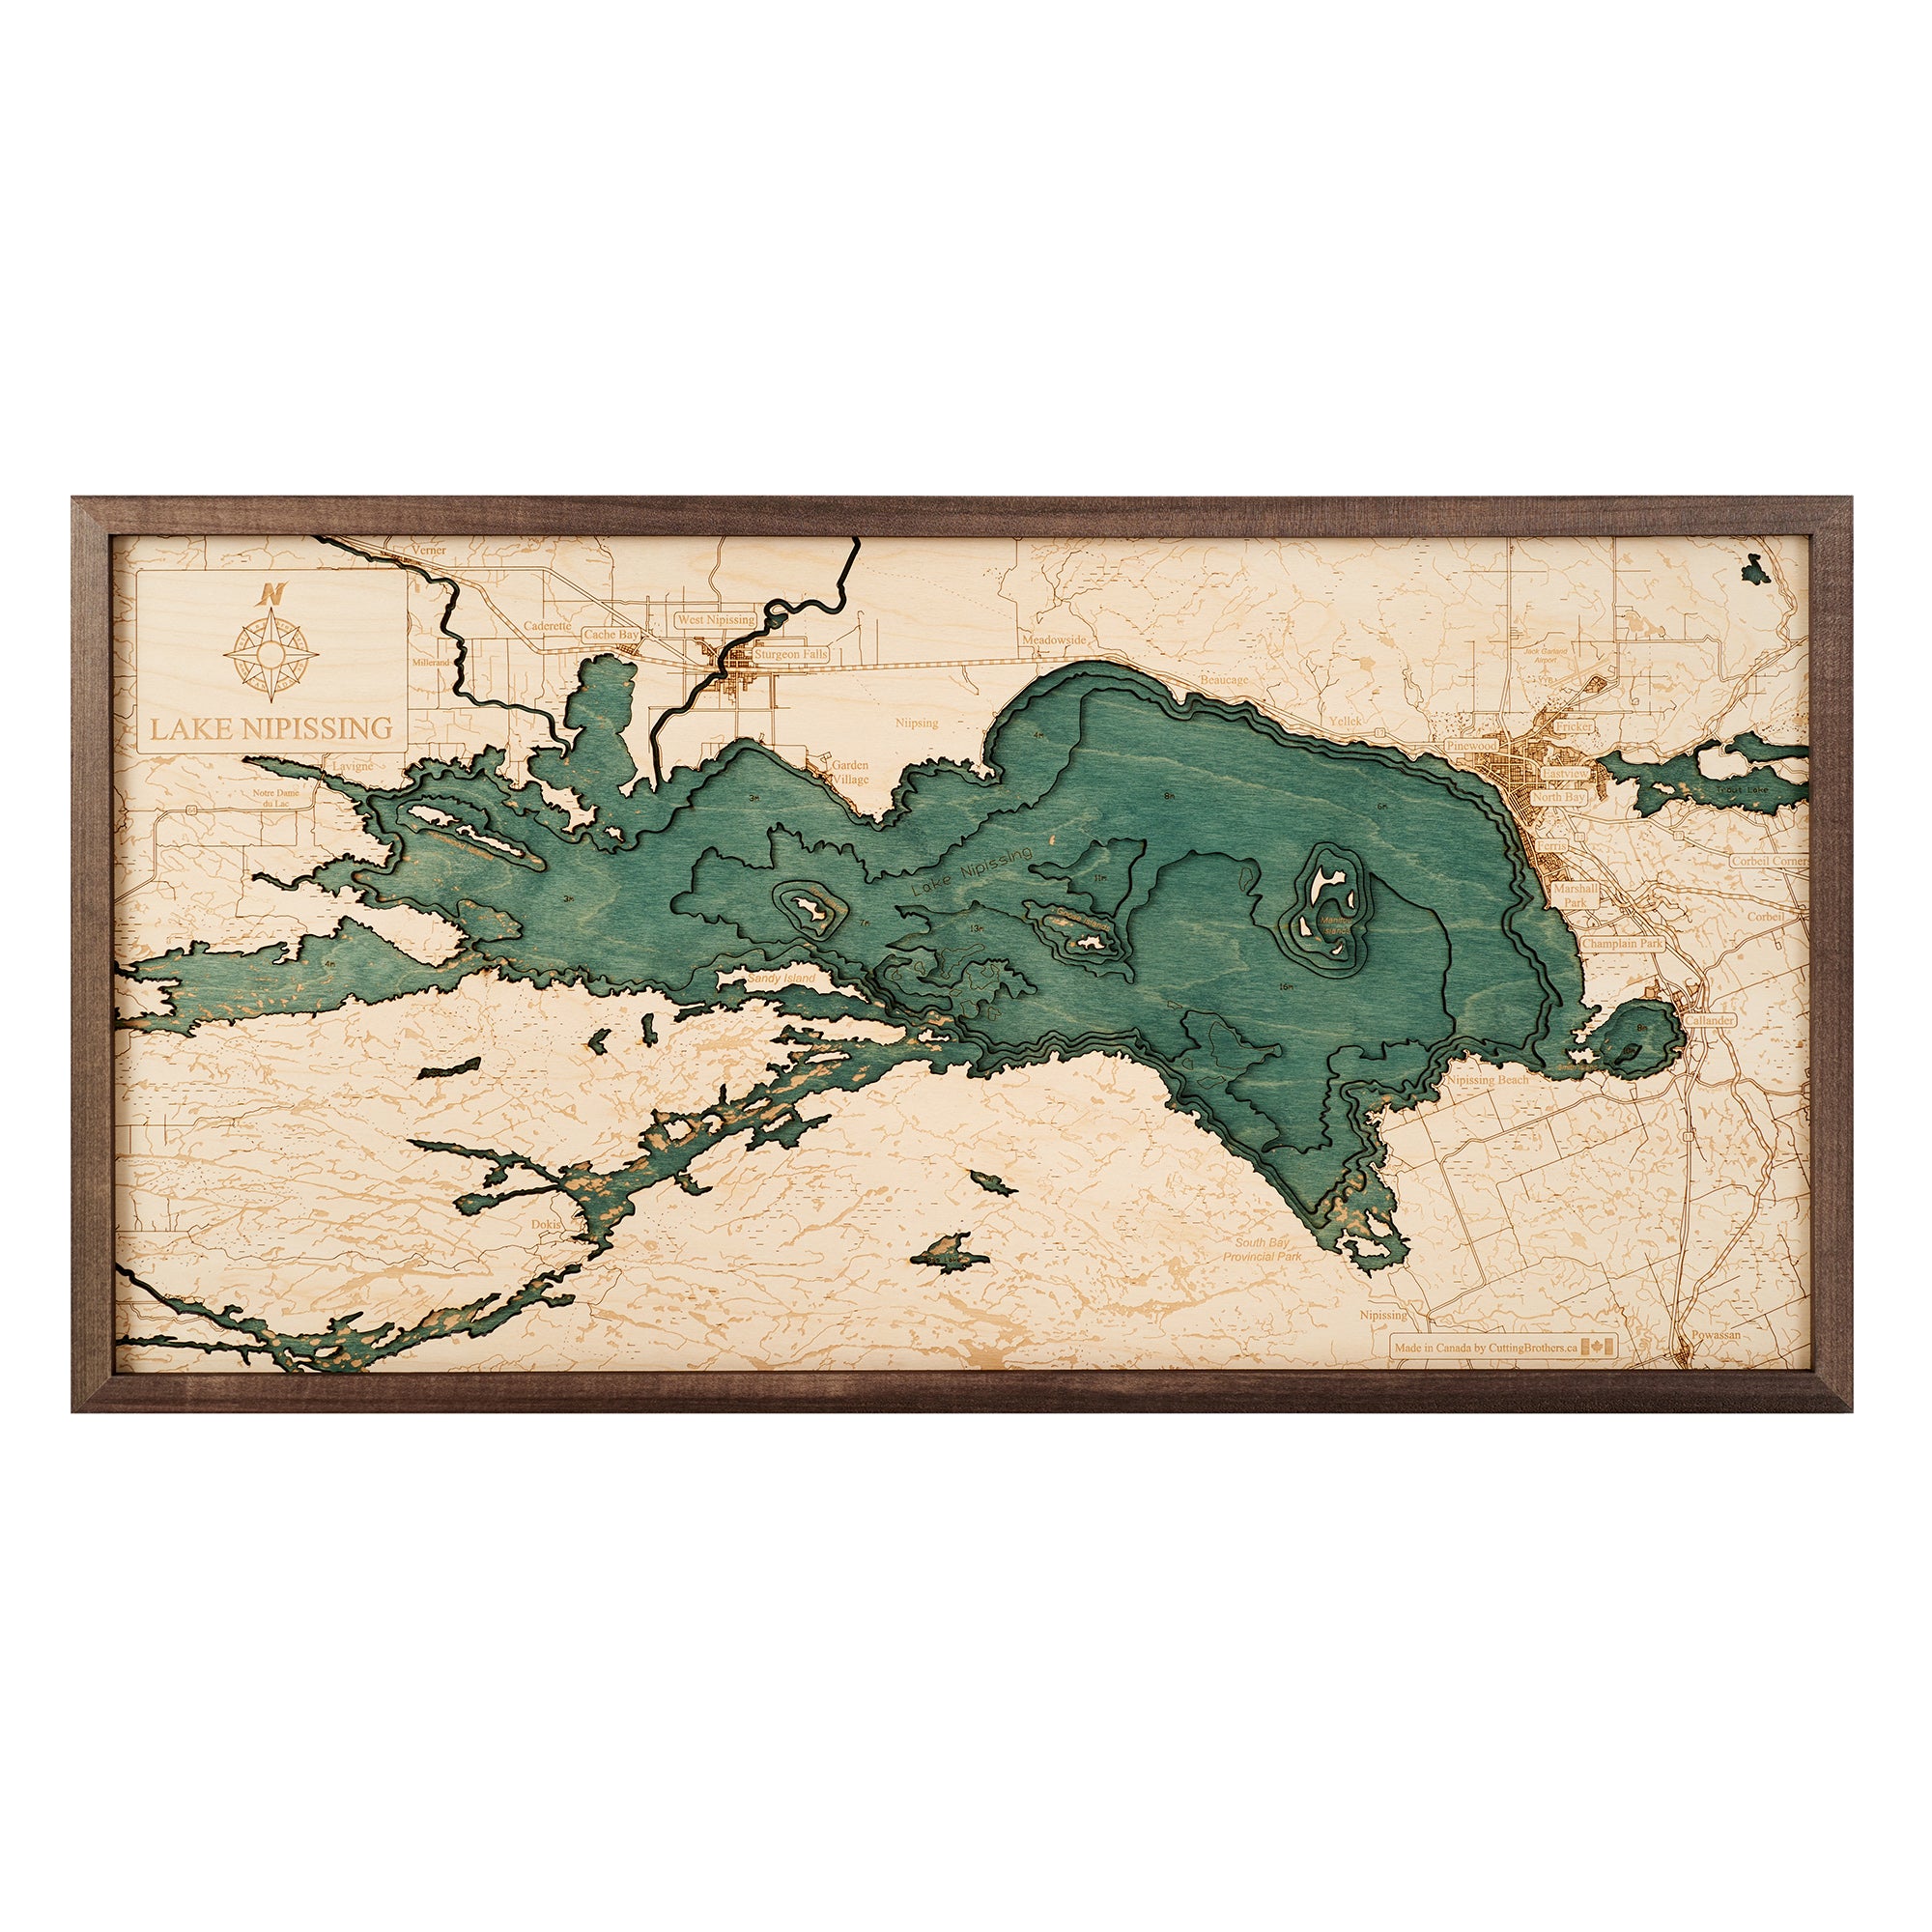 LAKE NIPPISSING 3D WOODEN WALL MAP - Version M